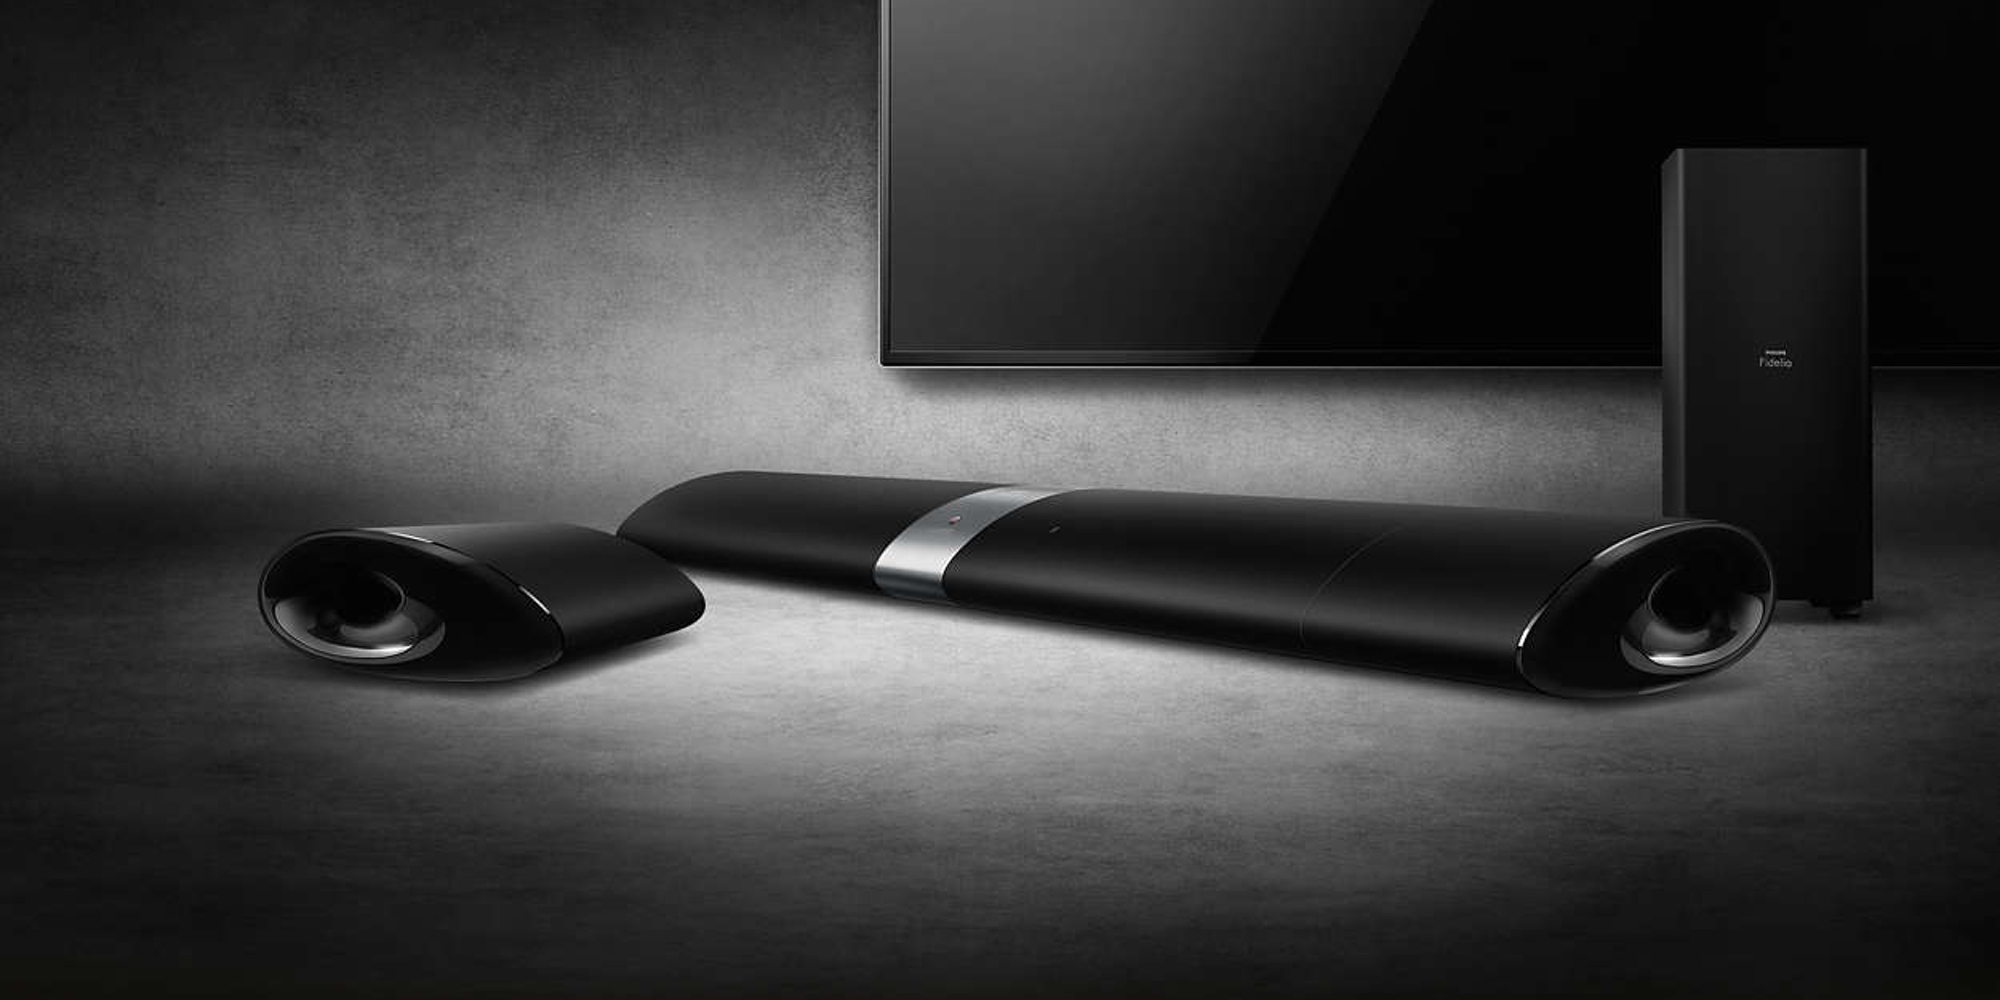 Philips Fidelio Soundbar Speakers to new low at $300 (50% off), more from $150